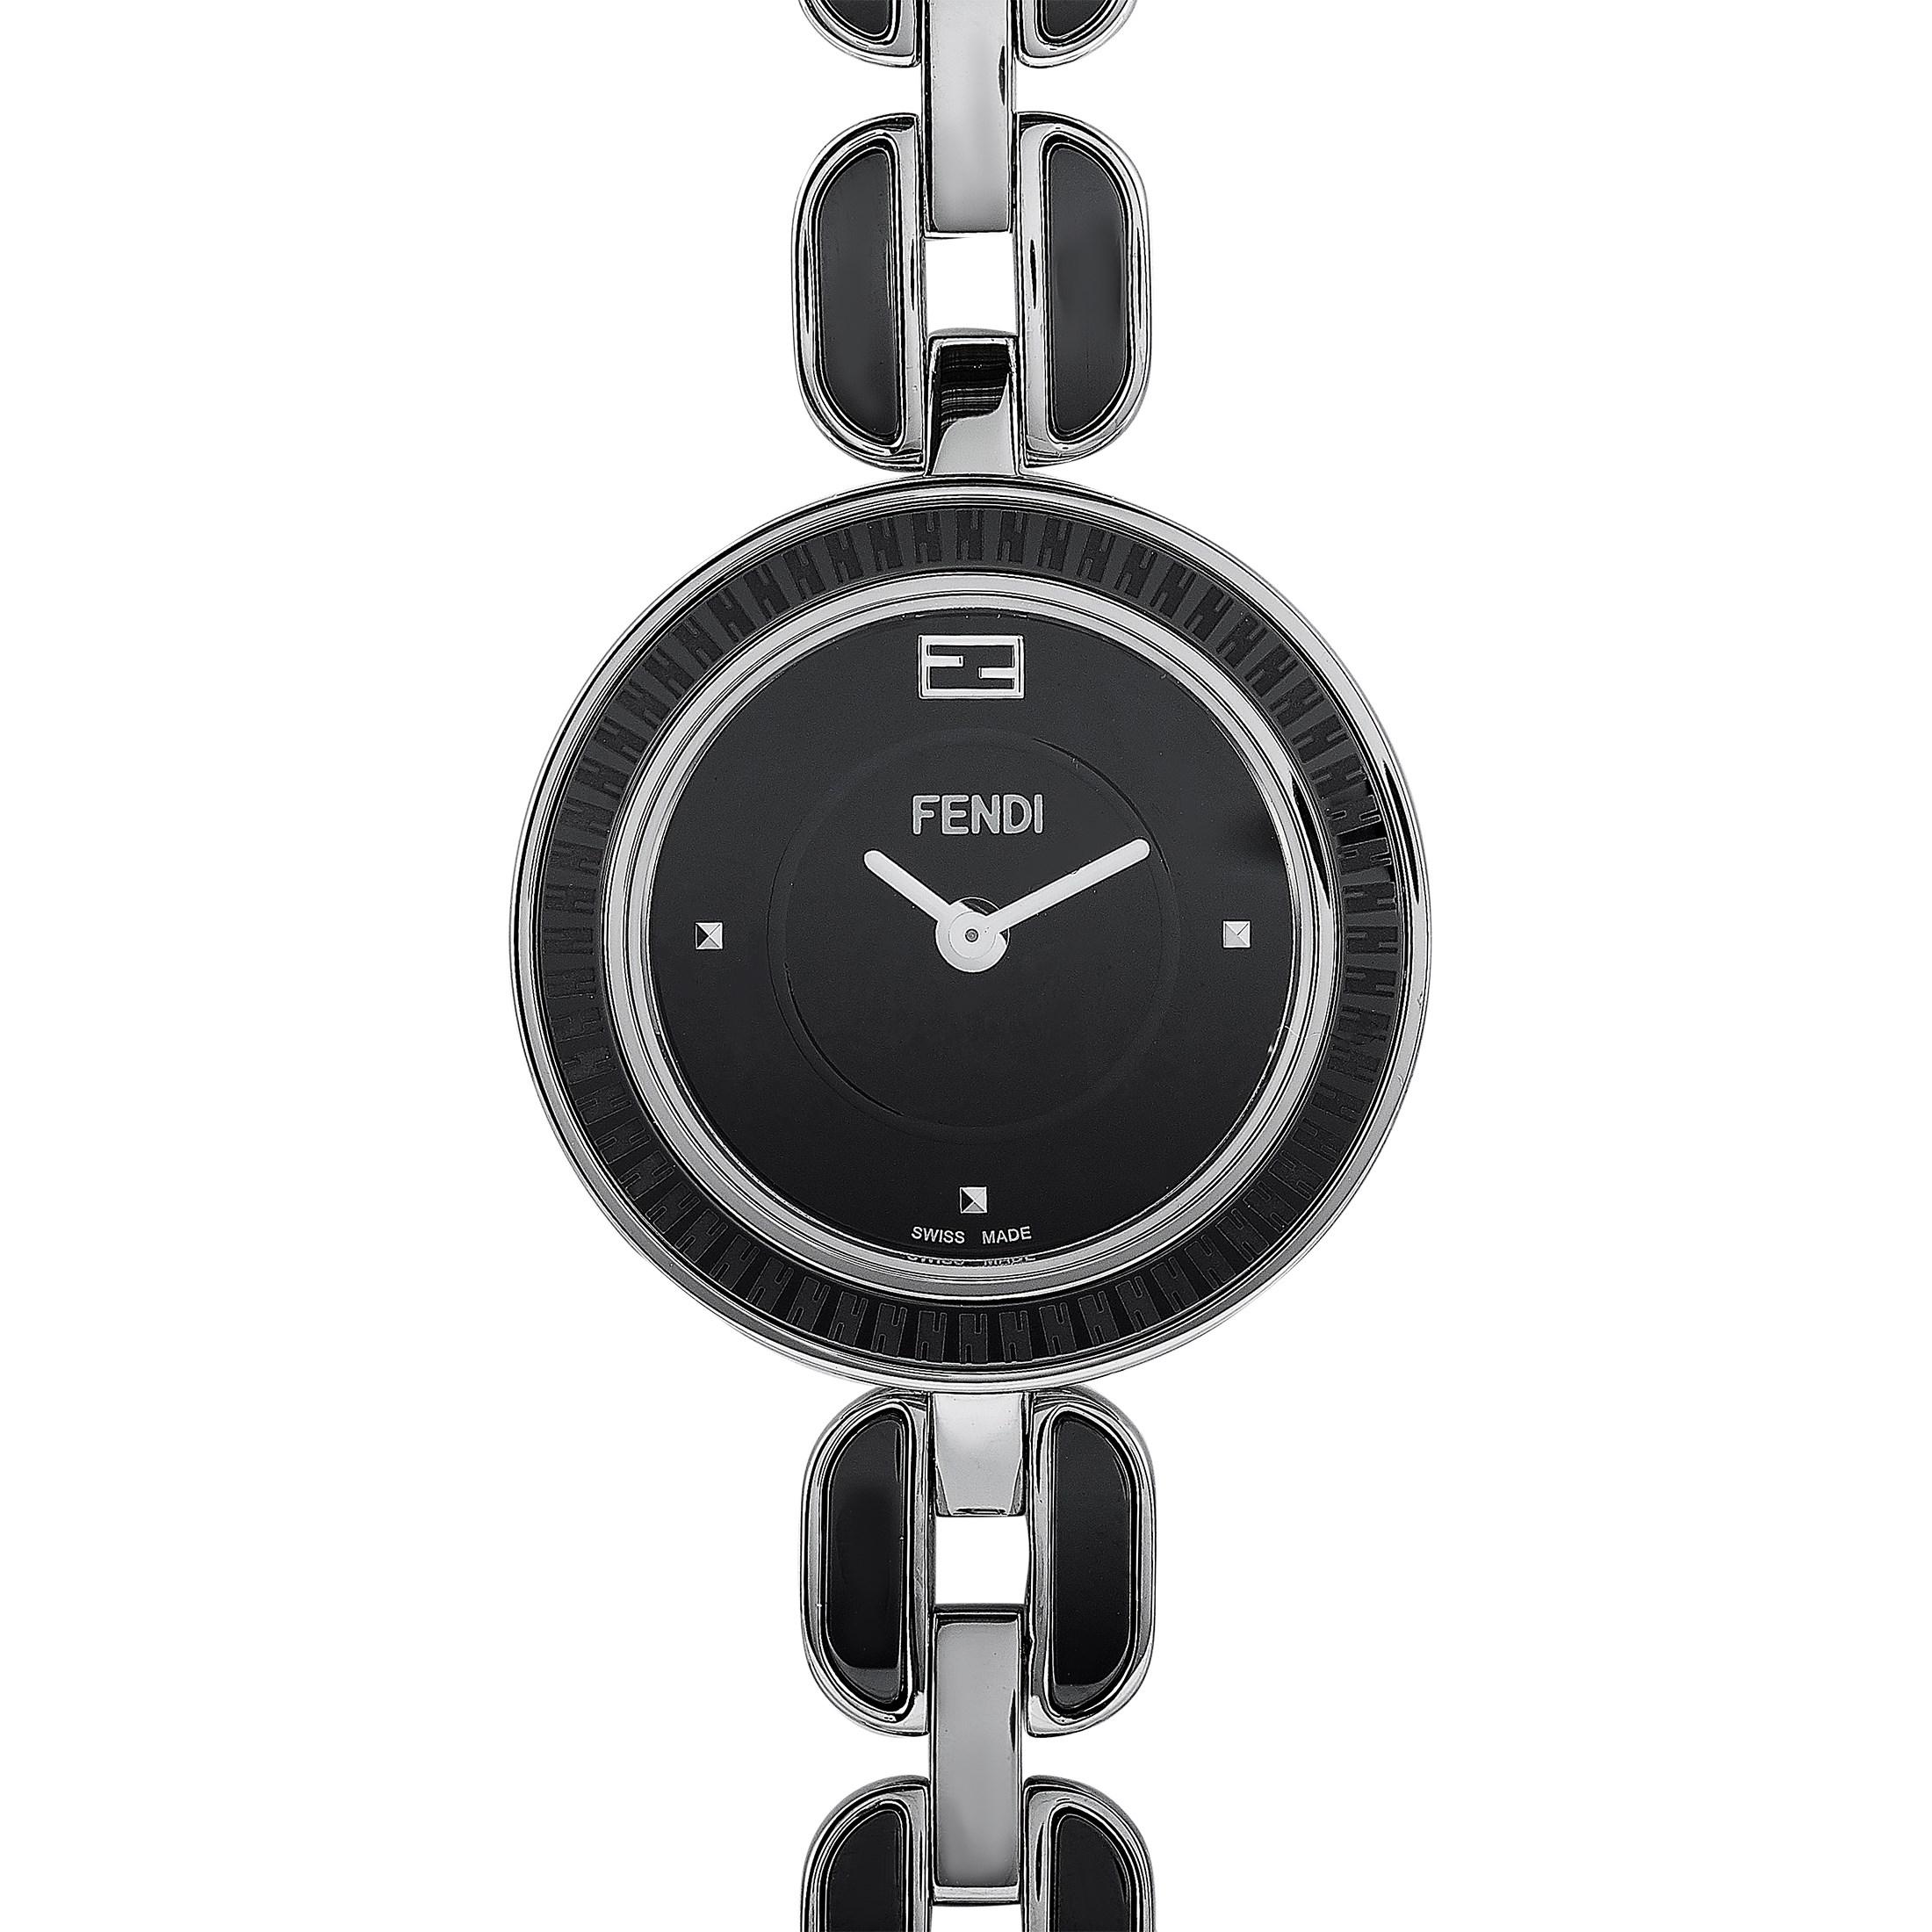 The Fendi My Way watch, reference number F353021001, comes with a stainless steel case that boasts a bezel with a black ceramic inlay. The case is presented on a stainless steel bracelet with black ceramic inserts. This model is powered by a quartz